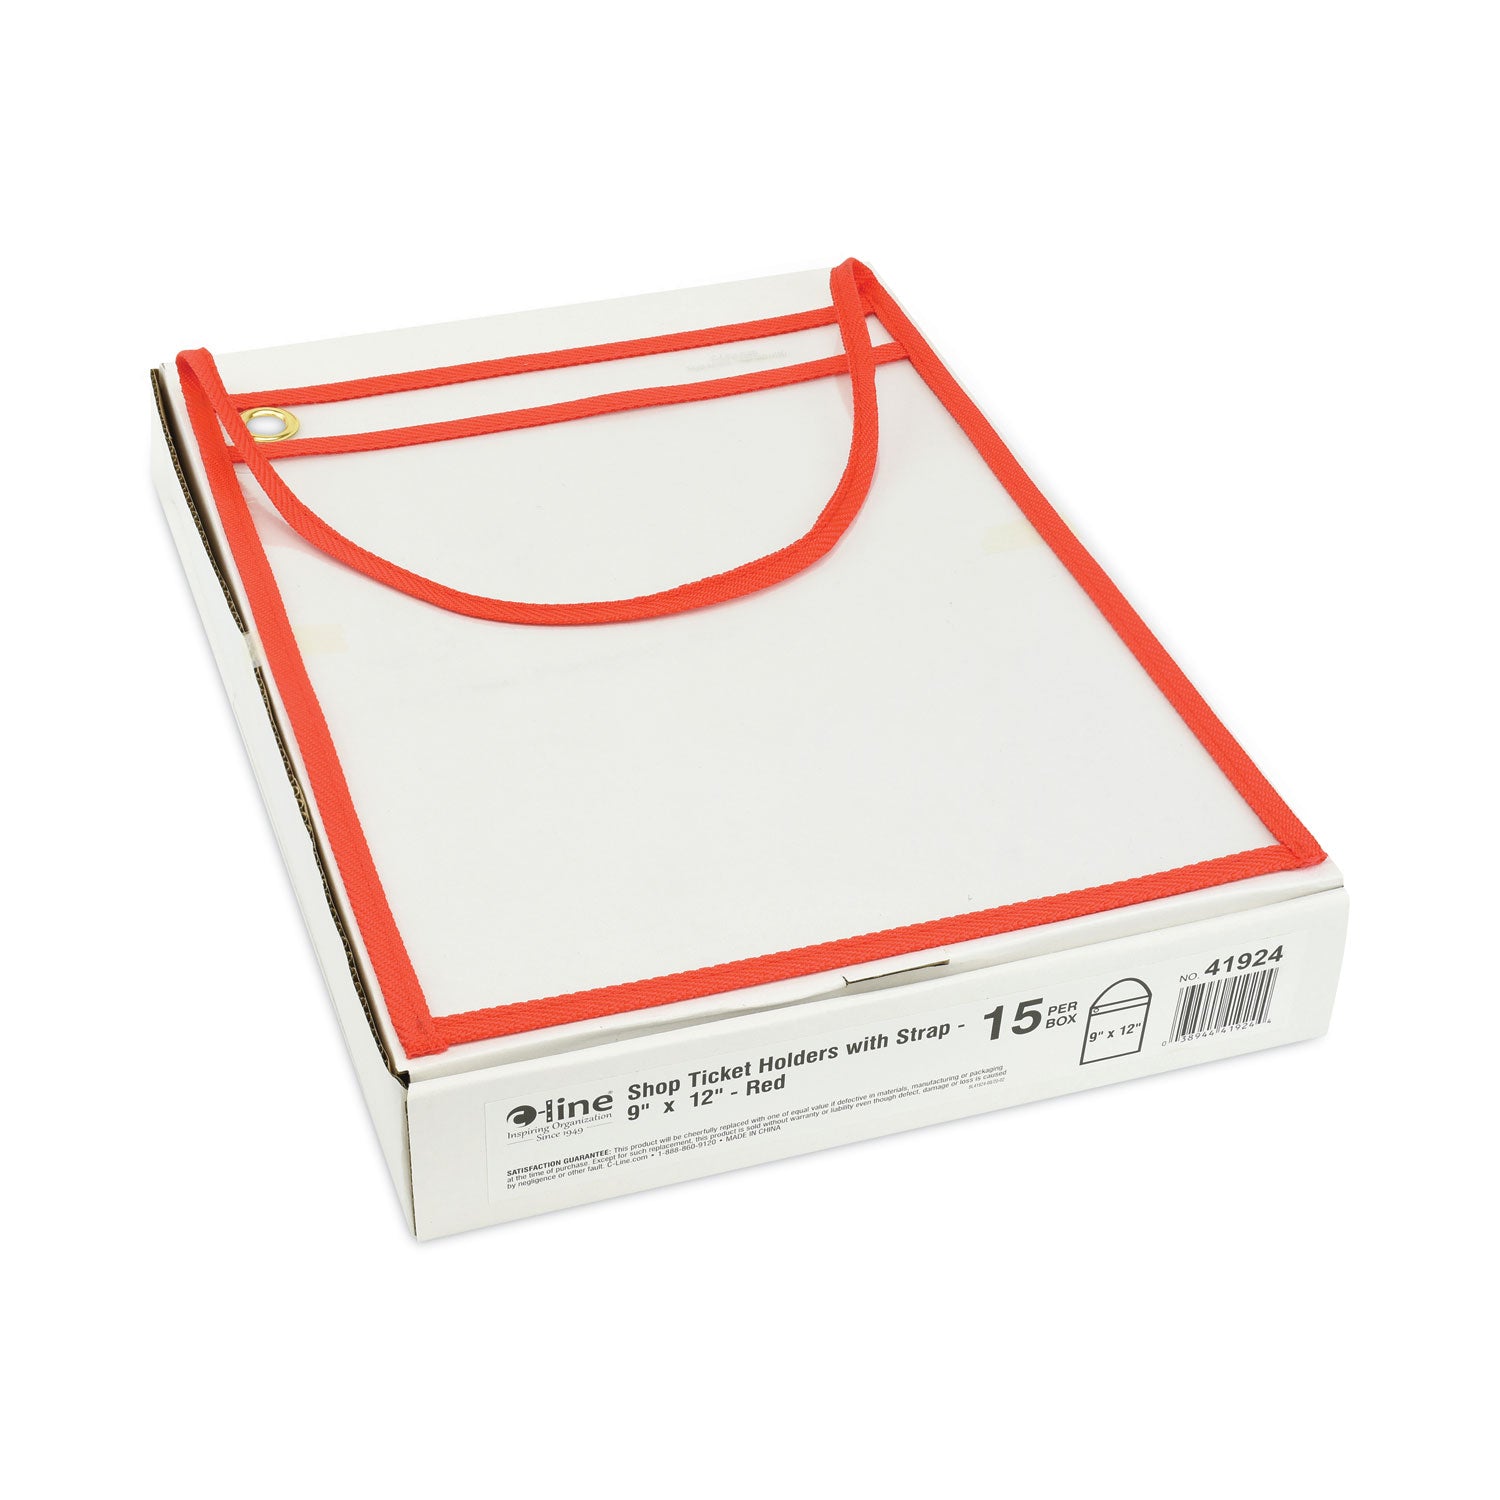 1-pocket-shop-ticket-holder-w-setrap-and-red-stitching-75-sheet-9-x-12-15-box_cli41924 - 4